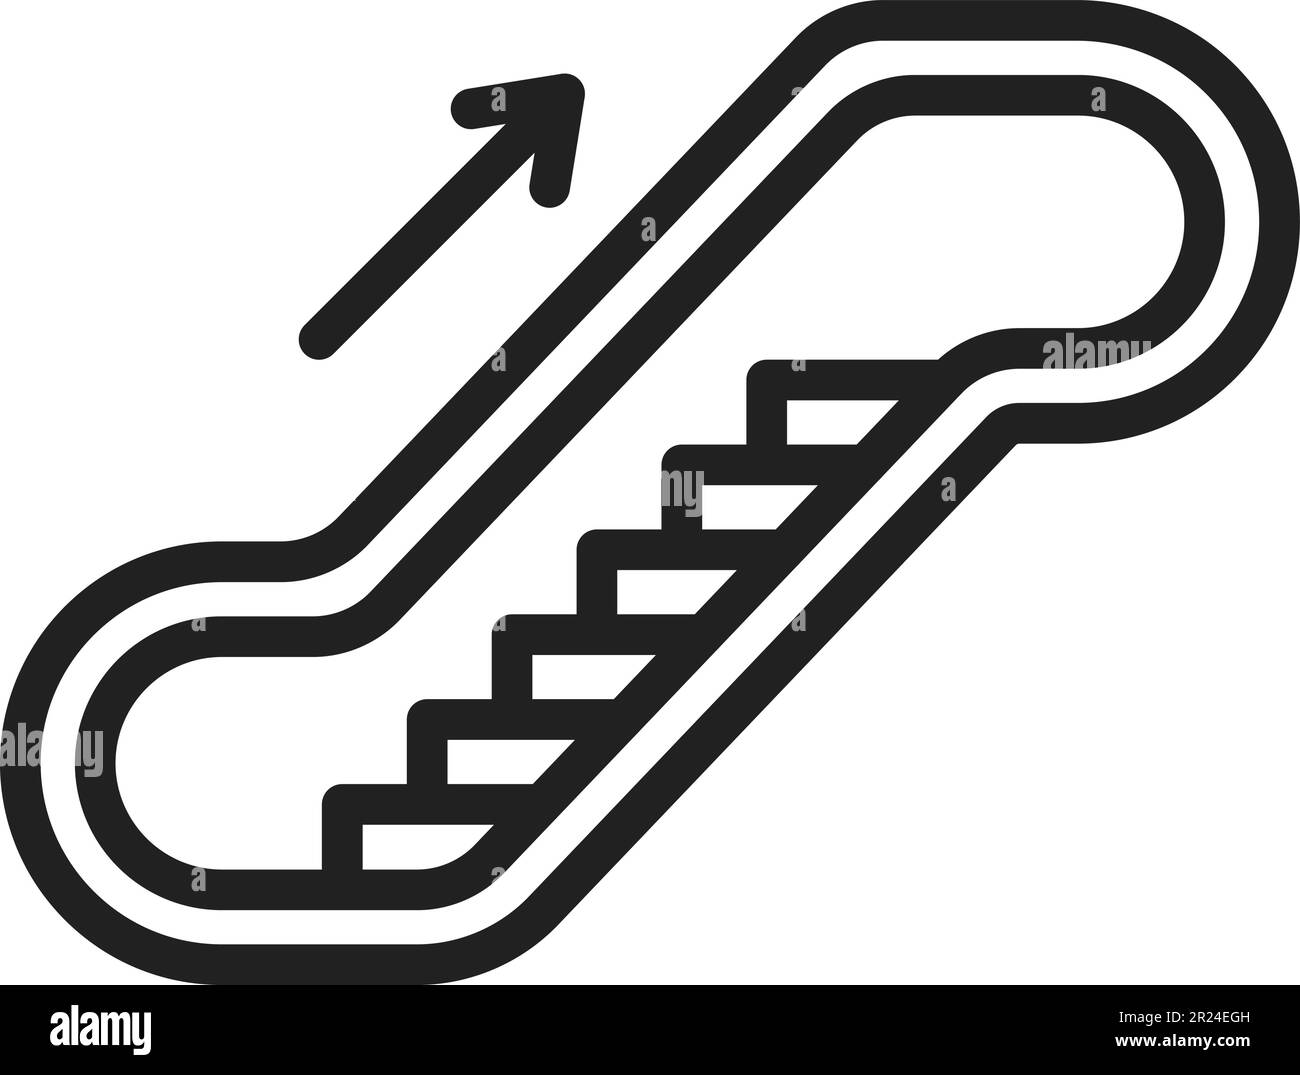 Escalator icon vector image. Suitable for mobile application web application and print media. Stock Vector